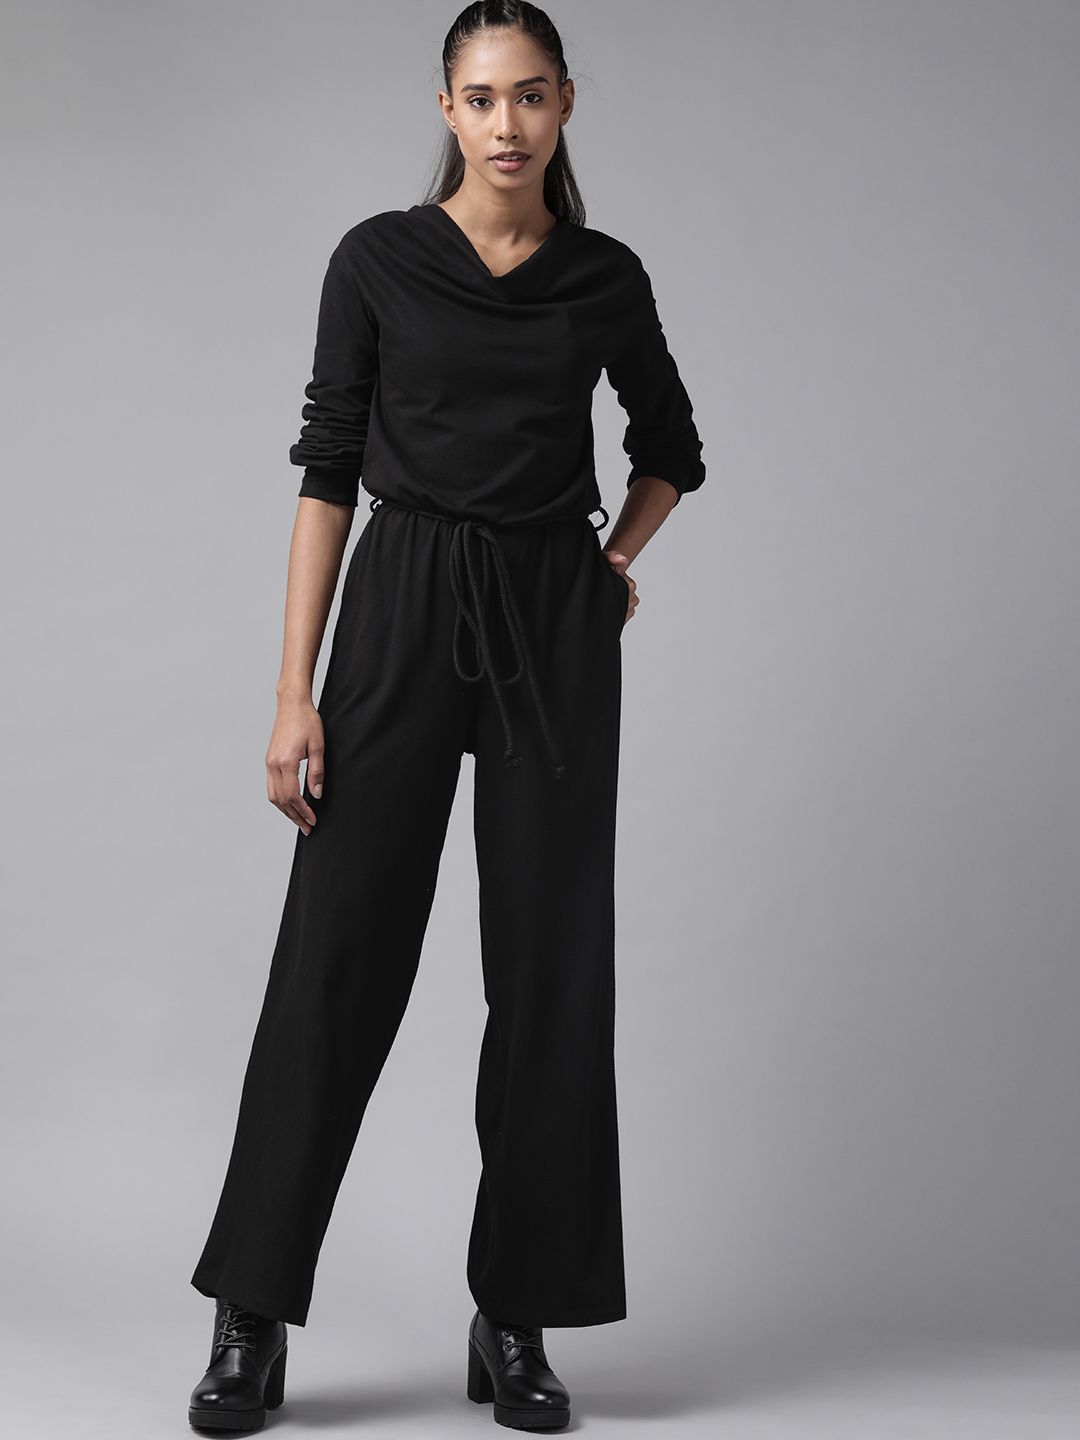 Roadster Women Black Solid Cowl Neck Basic Jumpsuit with Belt Price in India